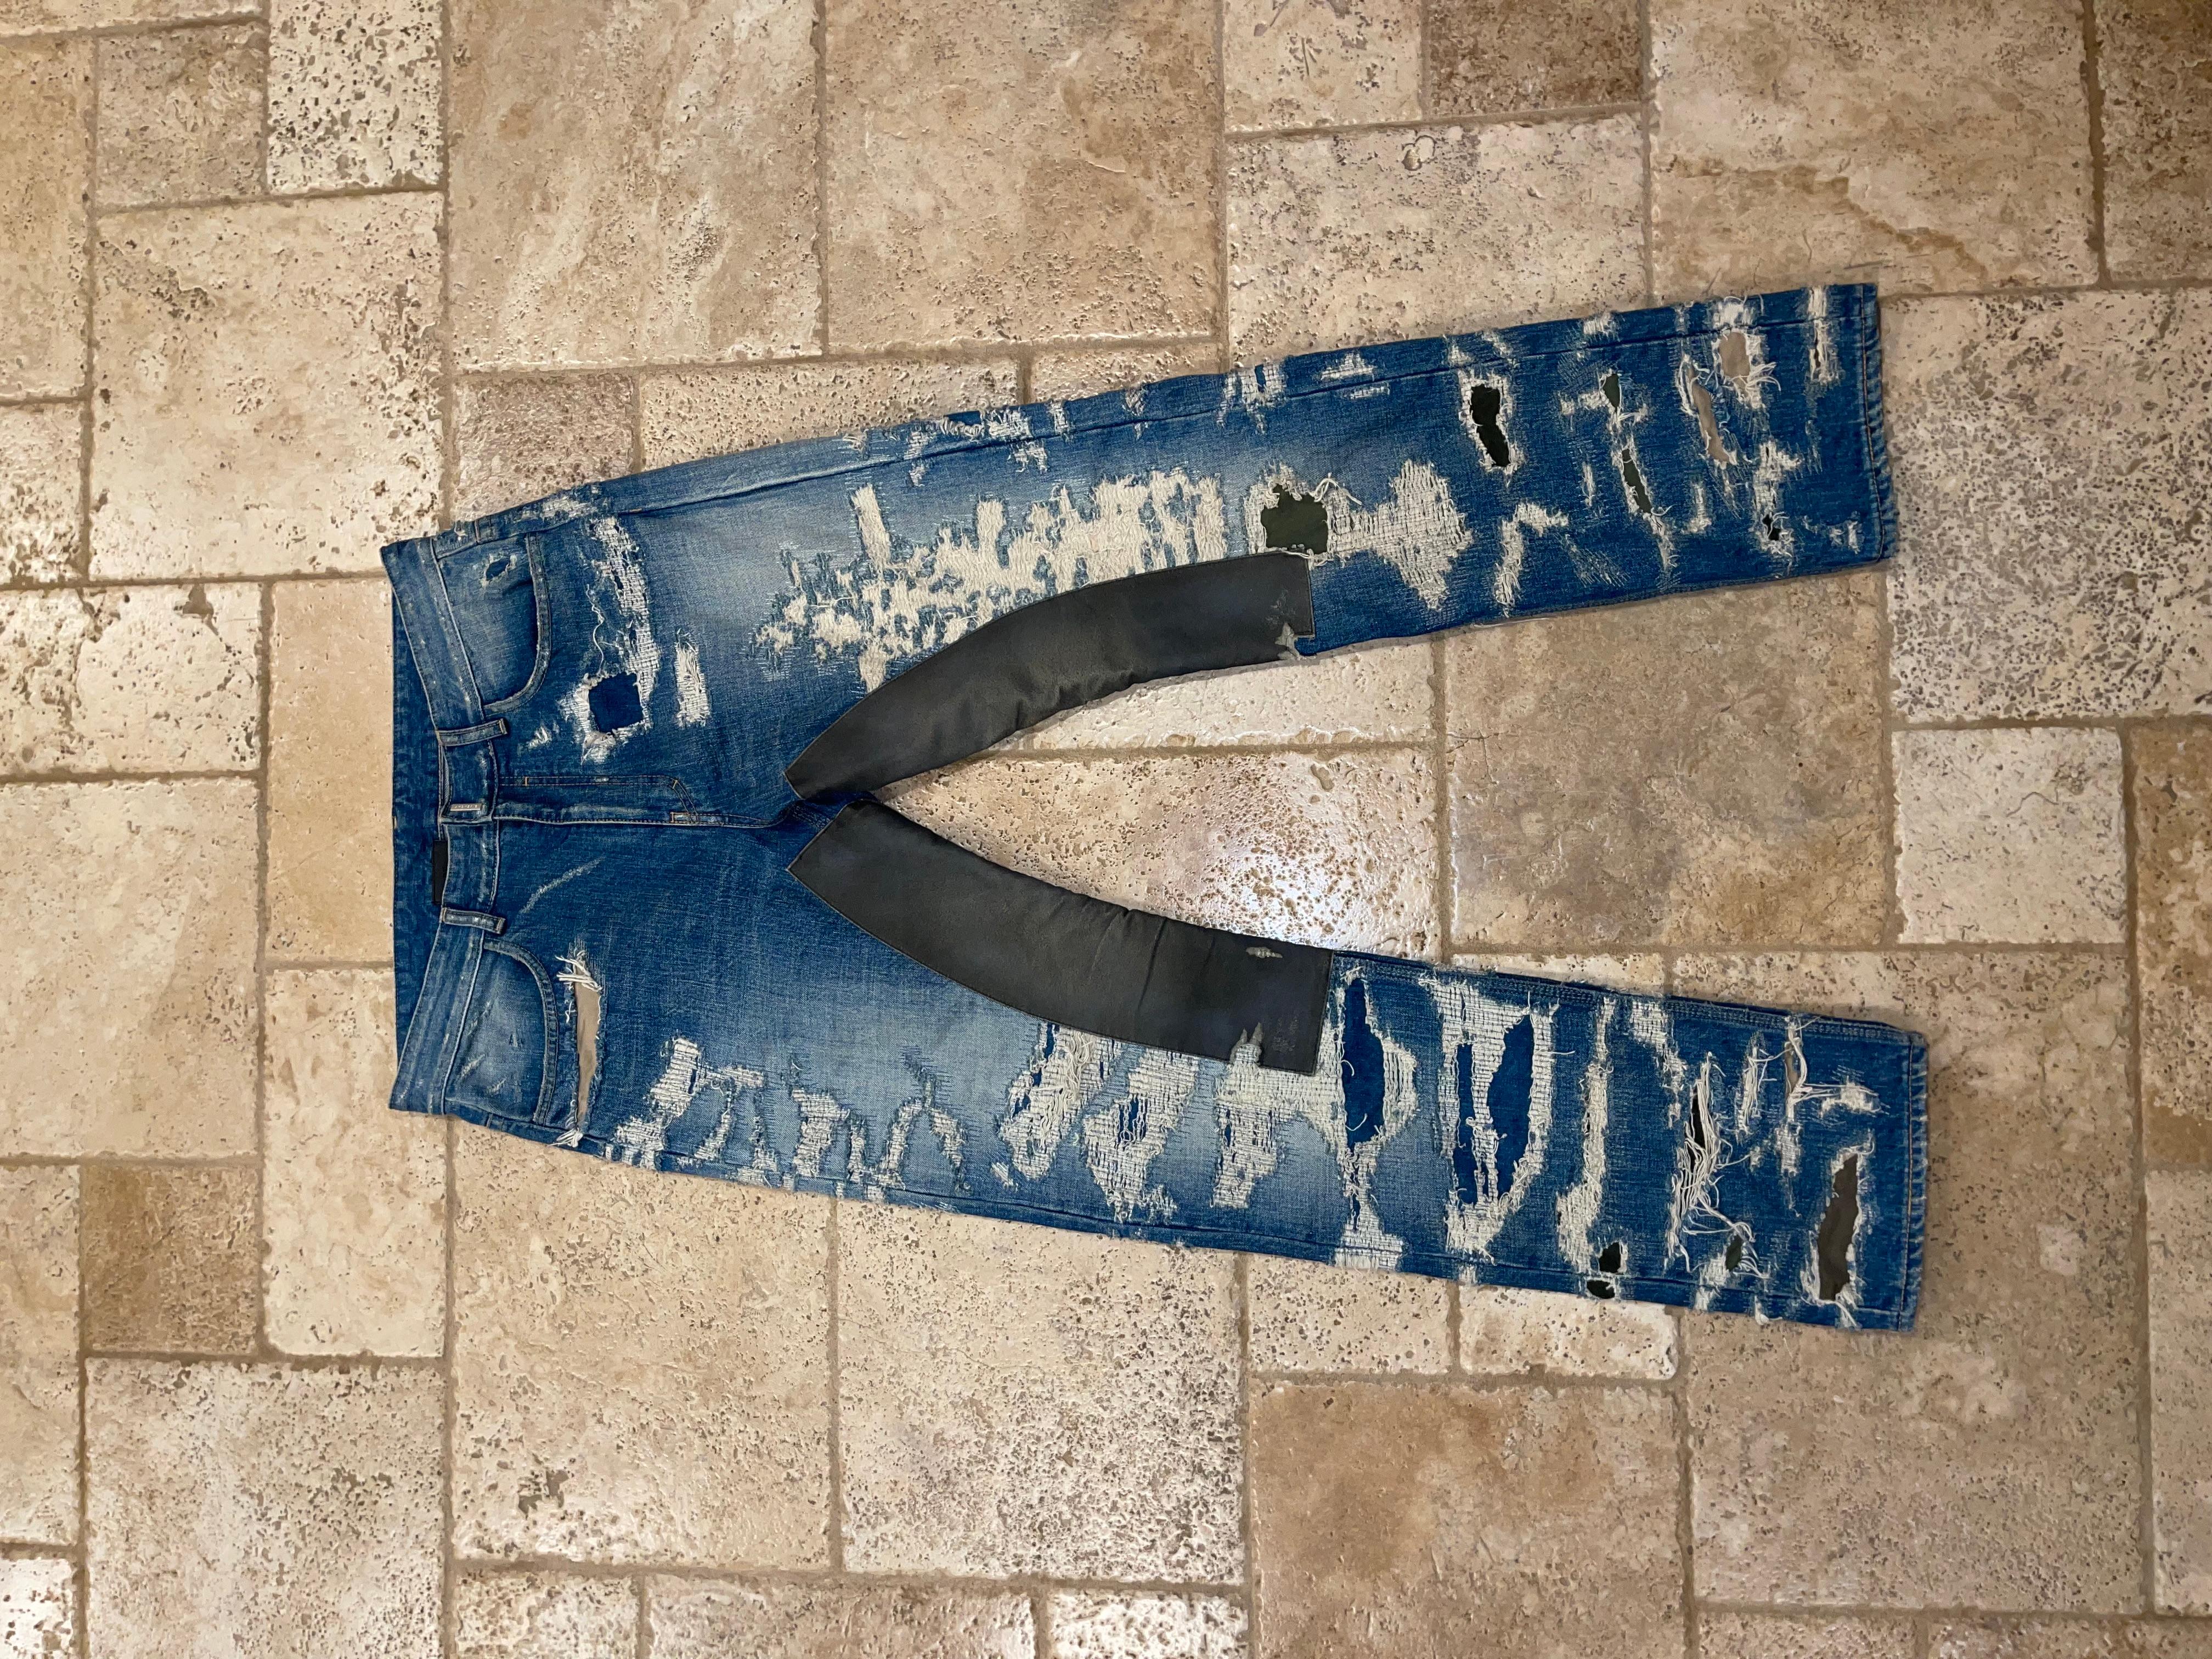 Givenchy Jeans In Destroyed Denim Moleskin
Excellent condition
Size 34
Matthew Williams

Rare, sought after and sold out pair
As seen on A$AP Rocky and Kid Cudi

Measurements:
Waist: 17.25”
Front rise: 11”
Leg opening: 7.5”
Front rise: 11”

ALL